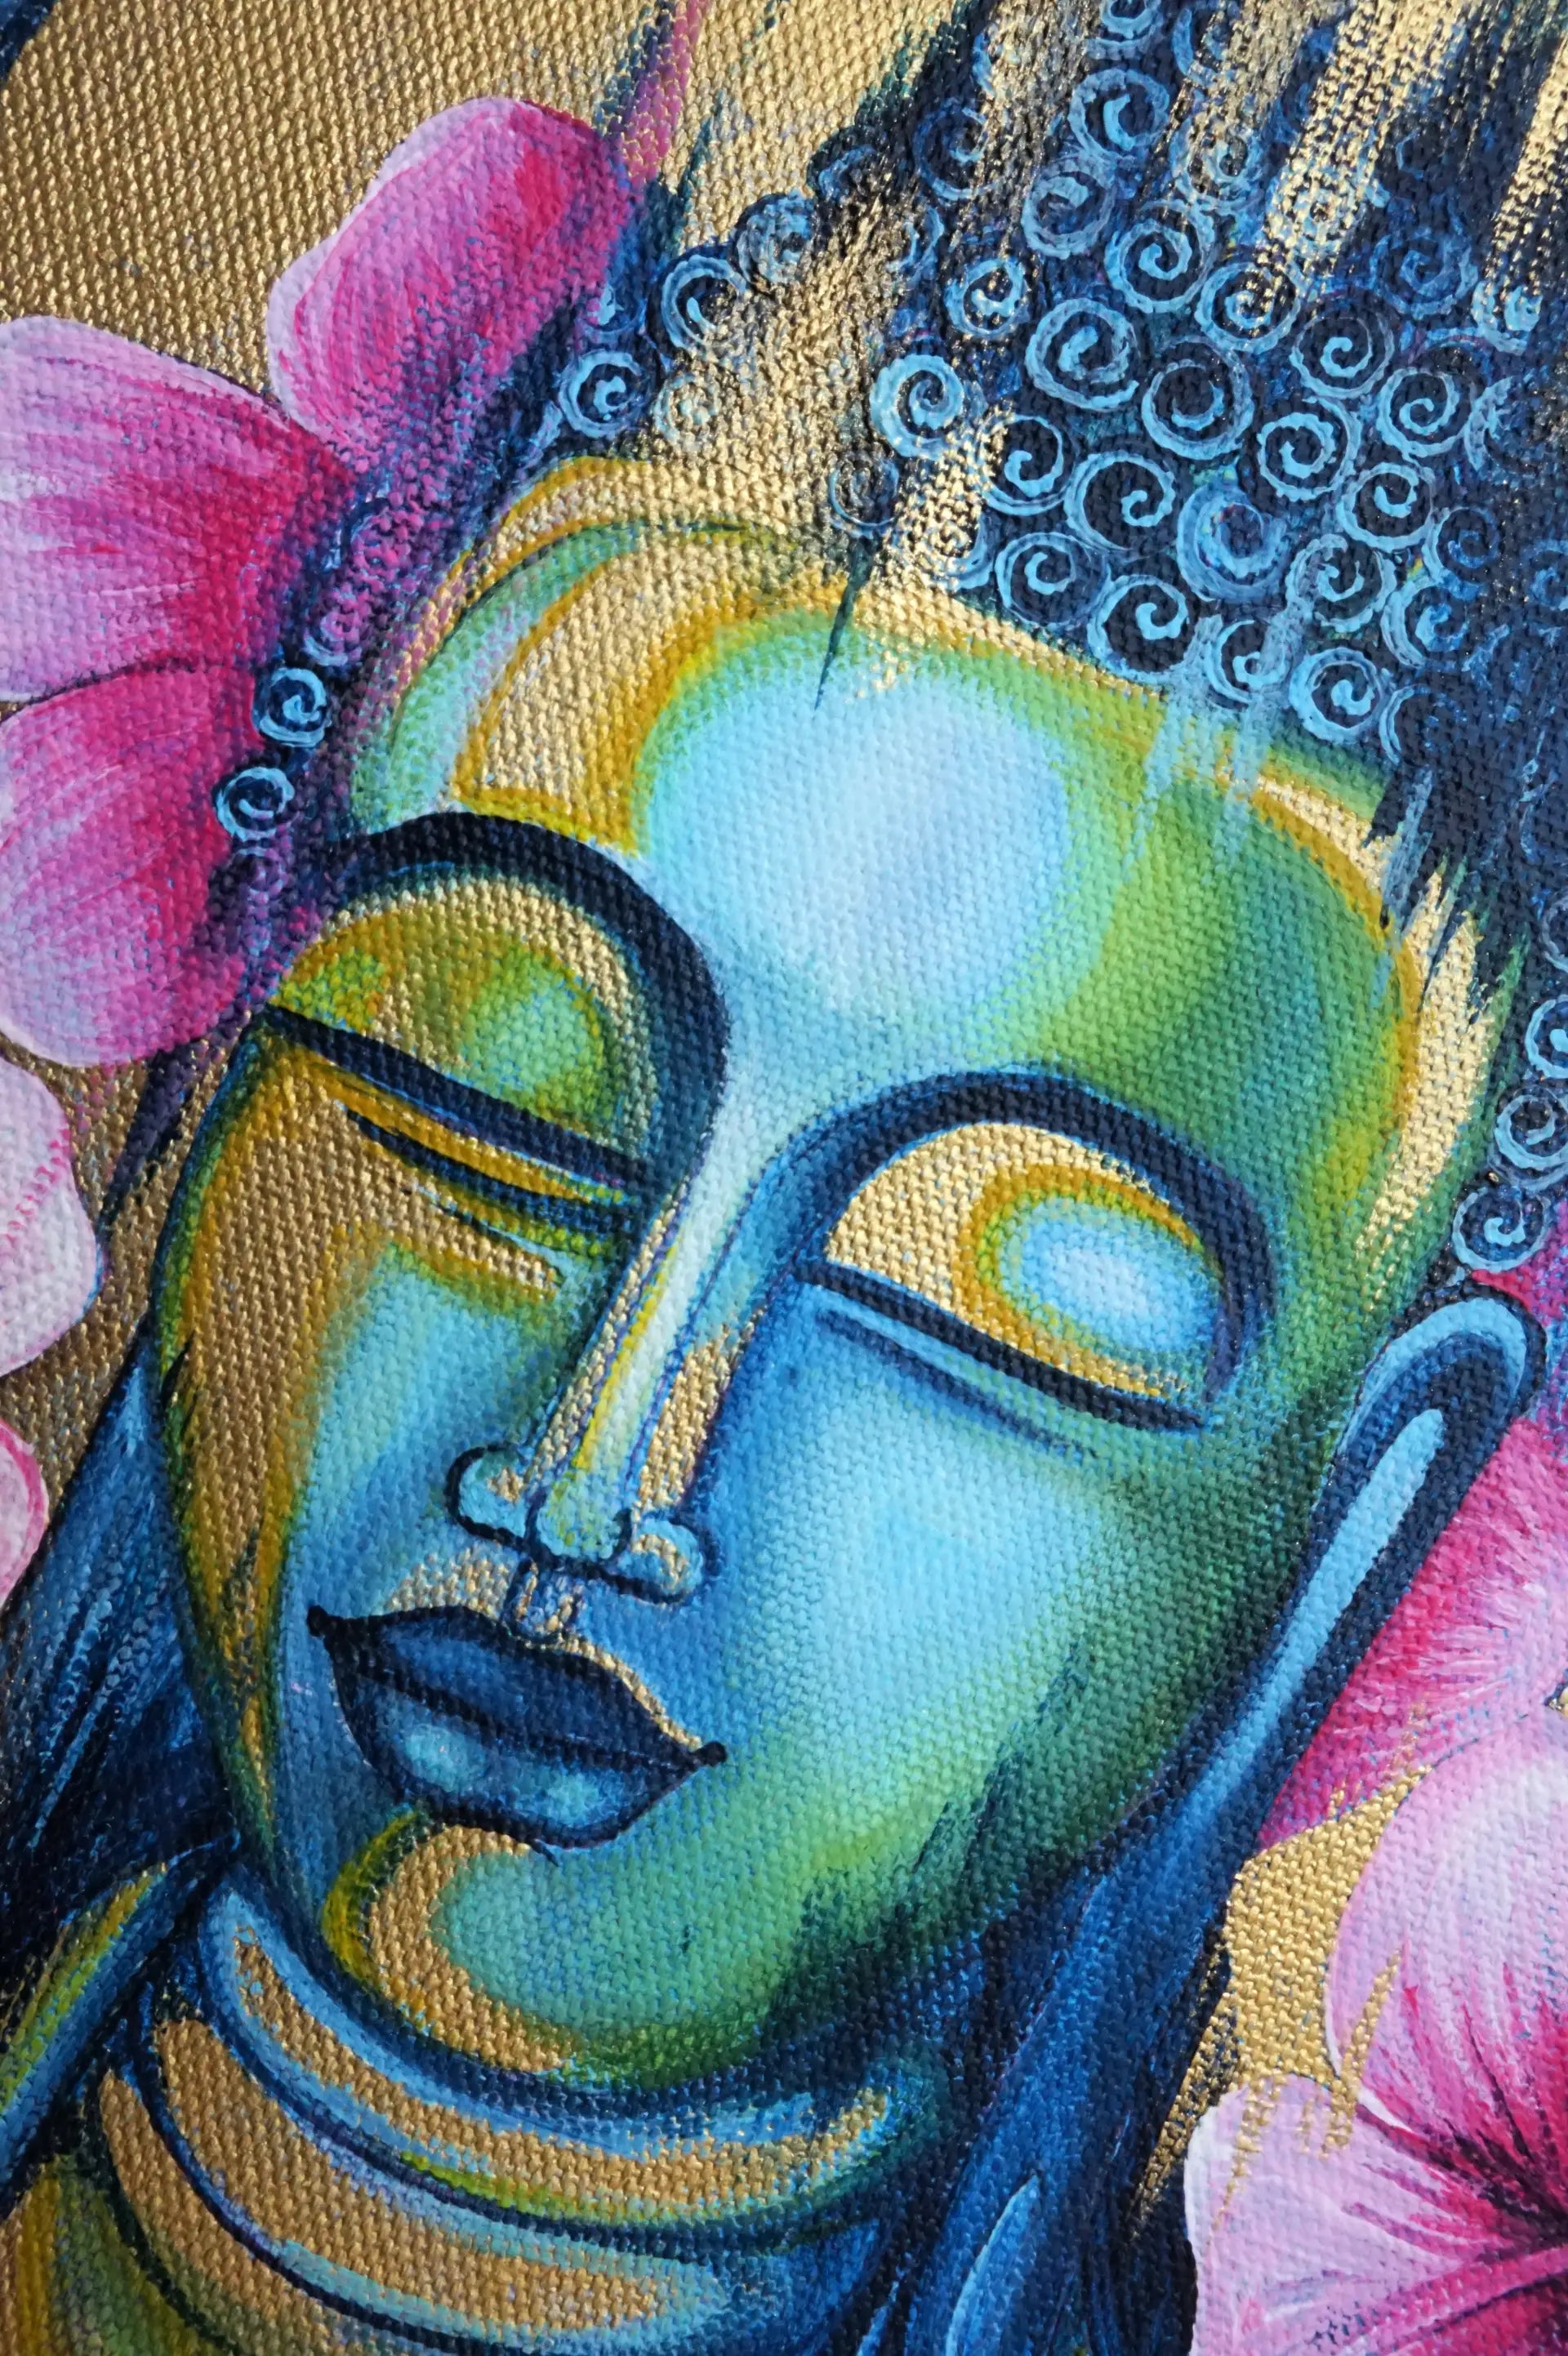 Cosmic Serenity: Learn to Paint a Meditating Buddha with a Galaxy and Gold using Acrylics on Canvas